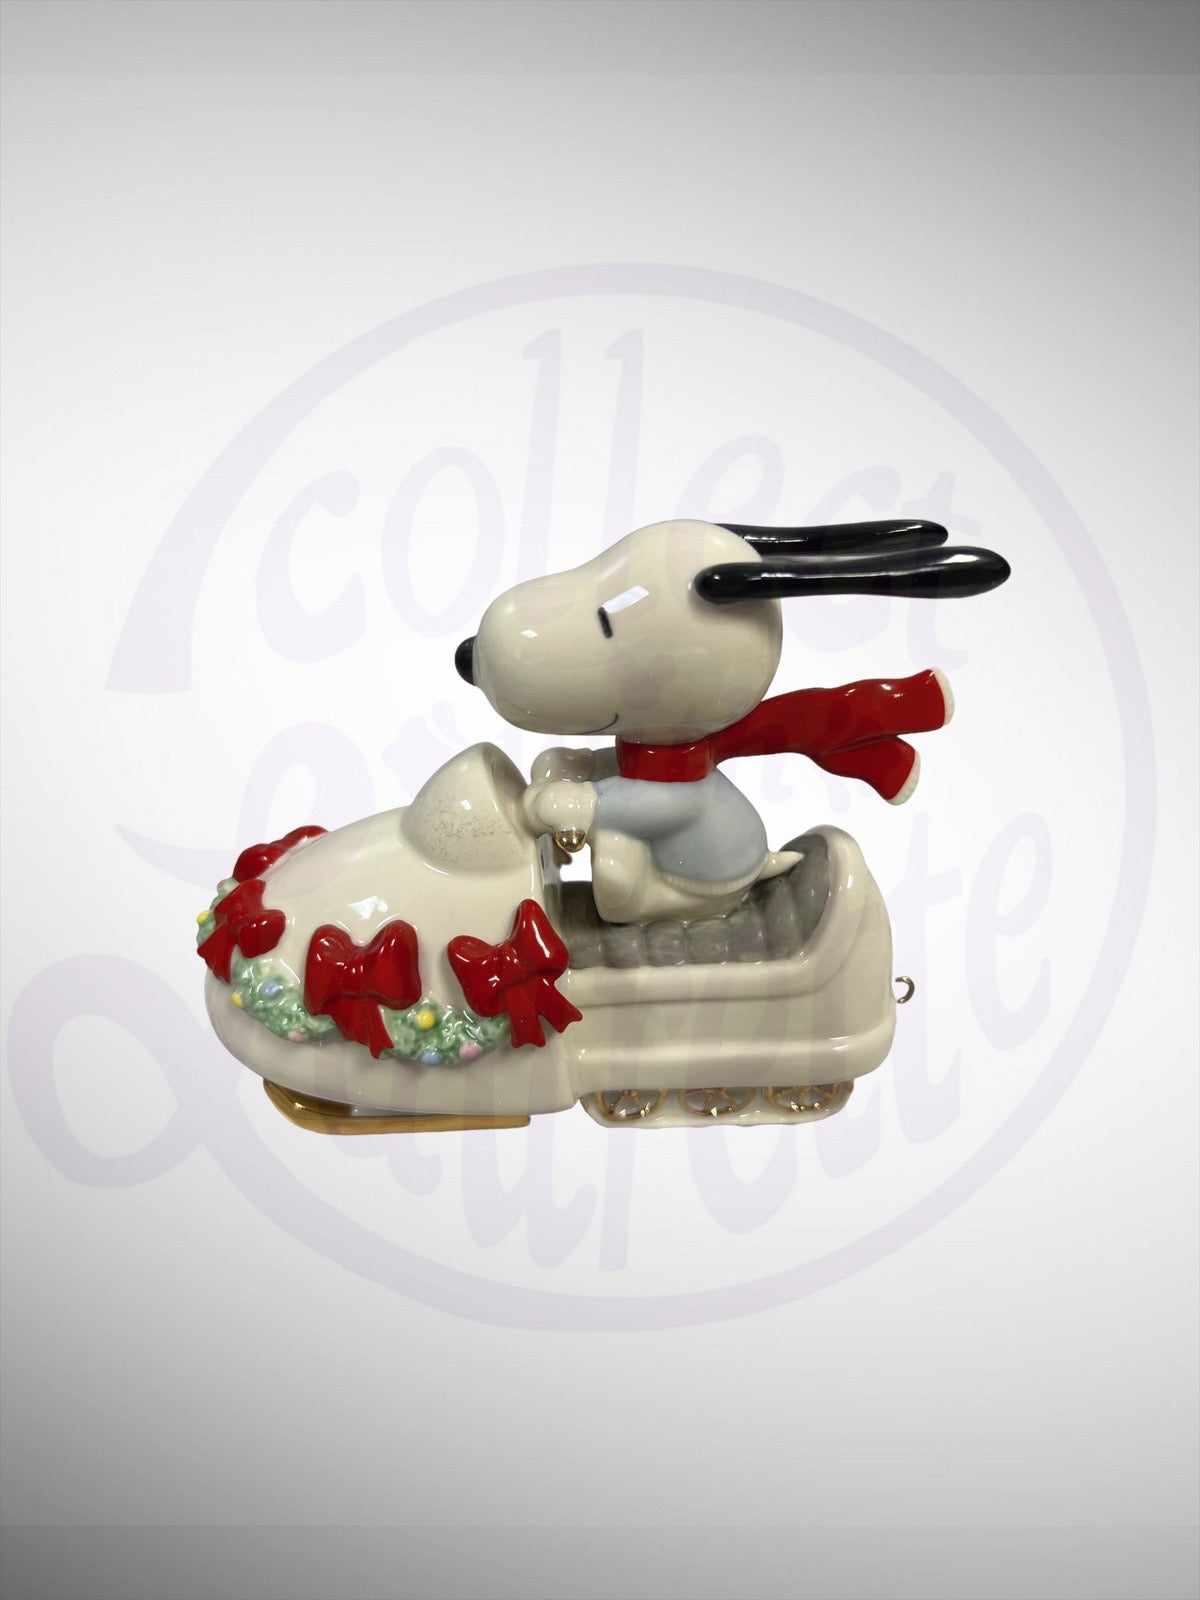 Lenox Peanuts Snowmobiling with Snoopy Figurine